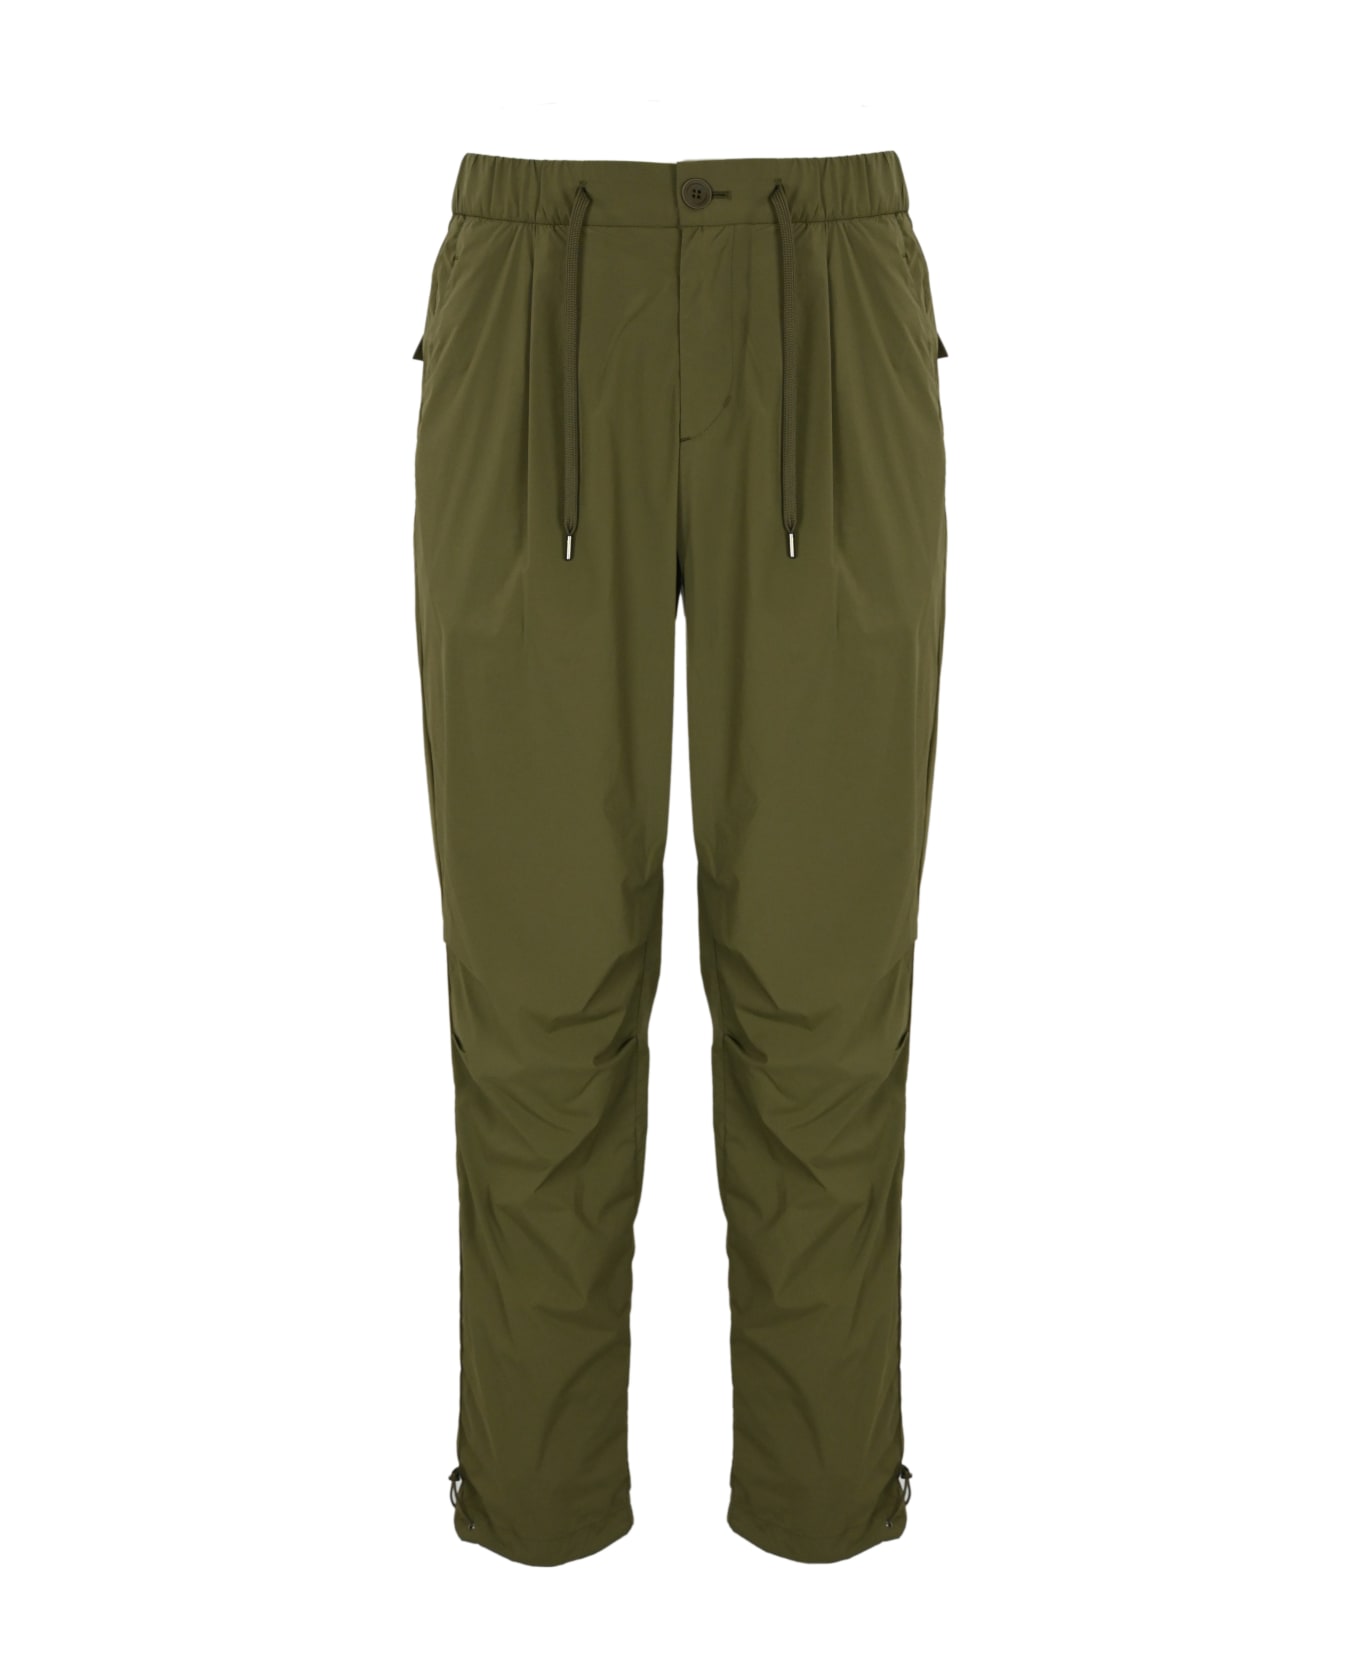 Herno Stretch Nylon Trousers - Light military